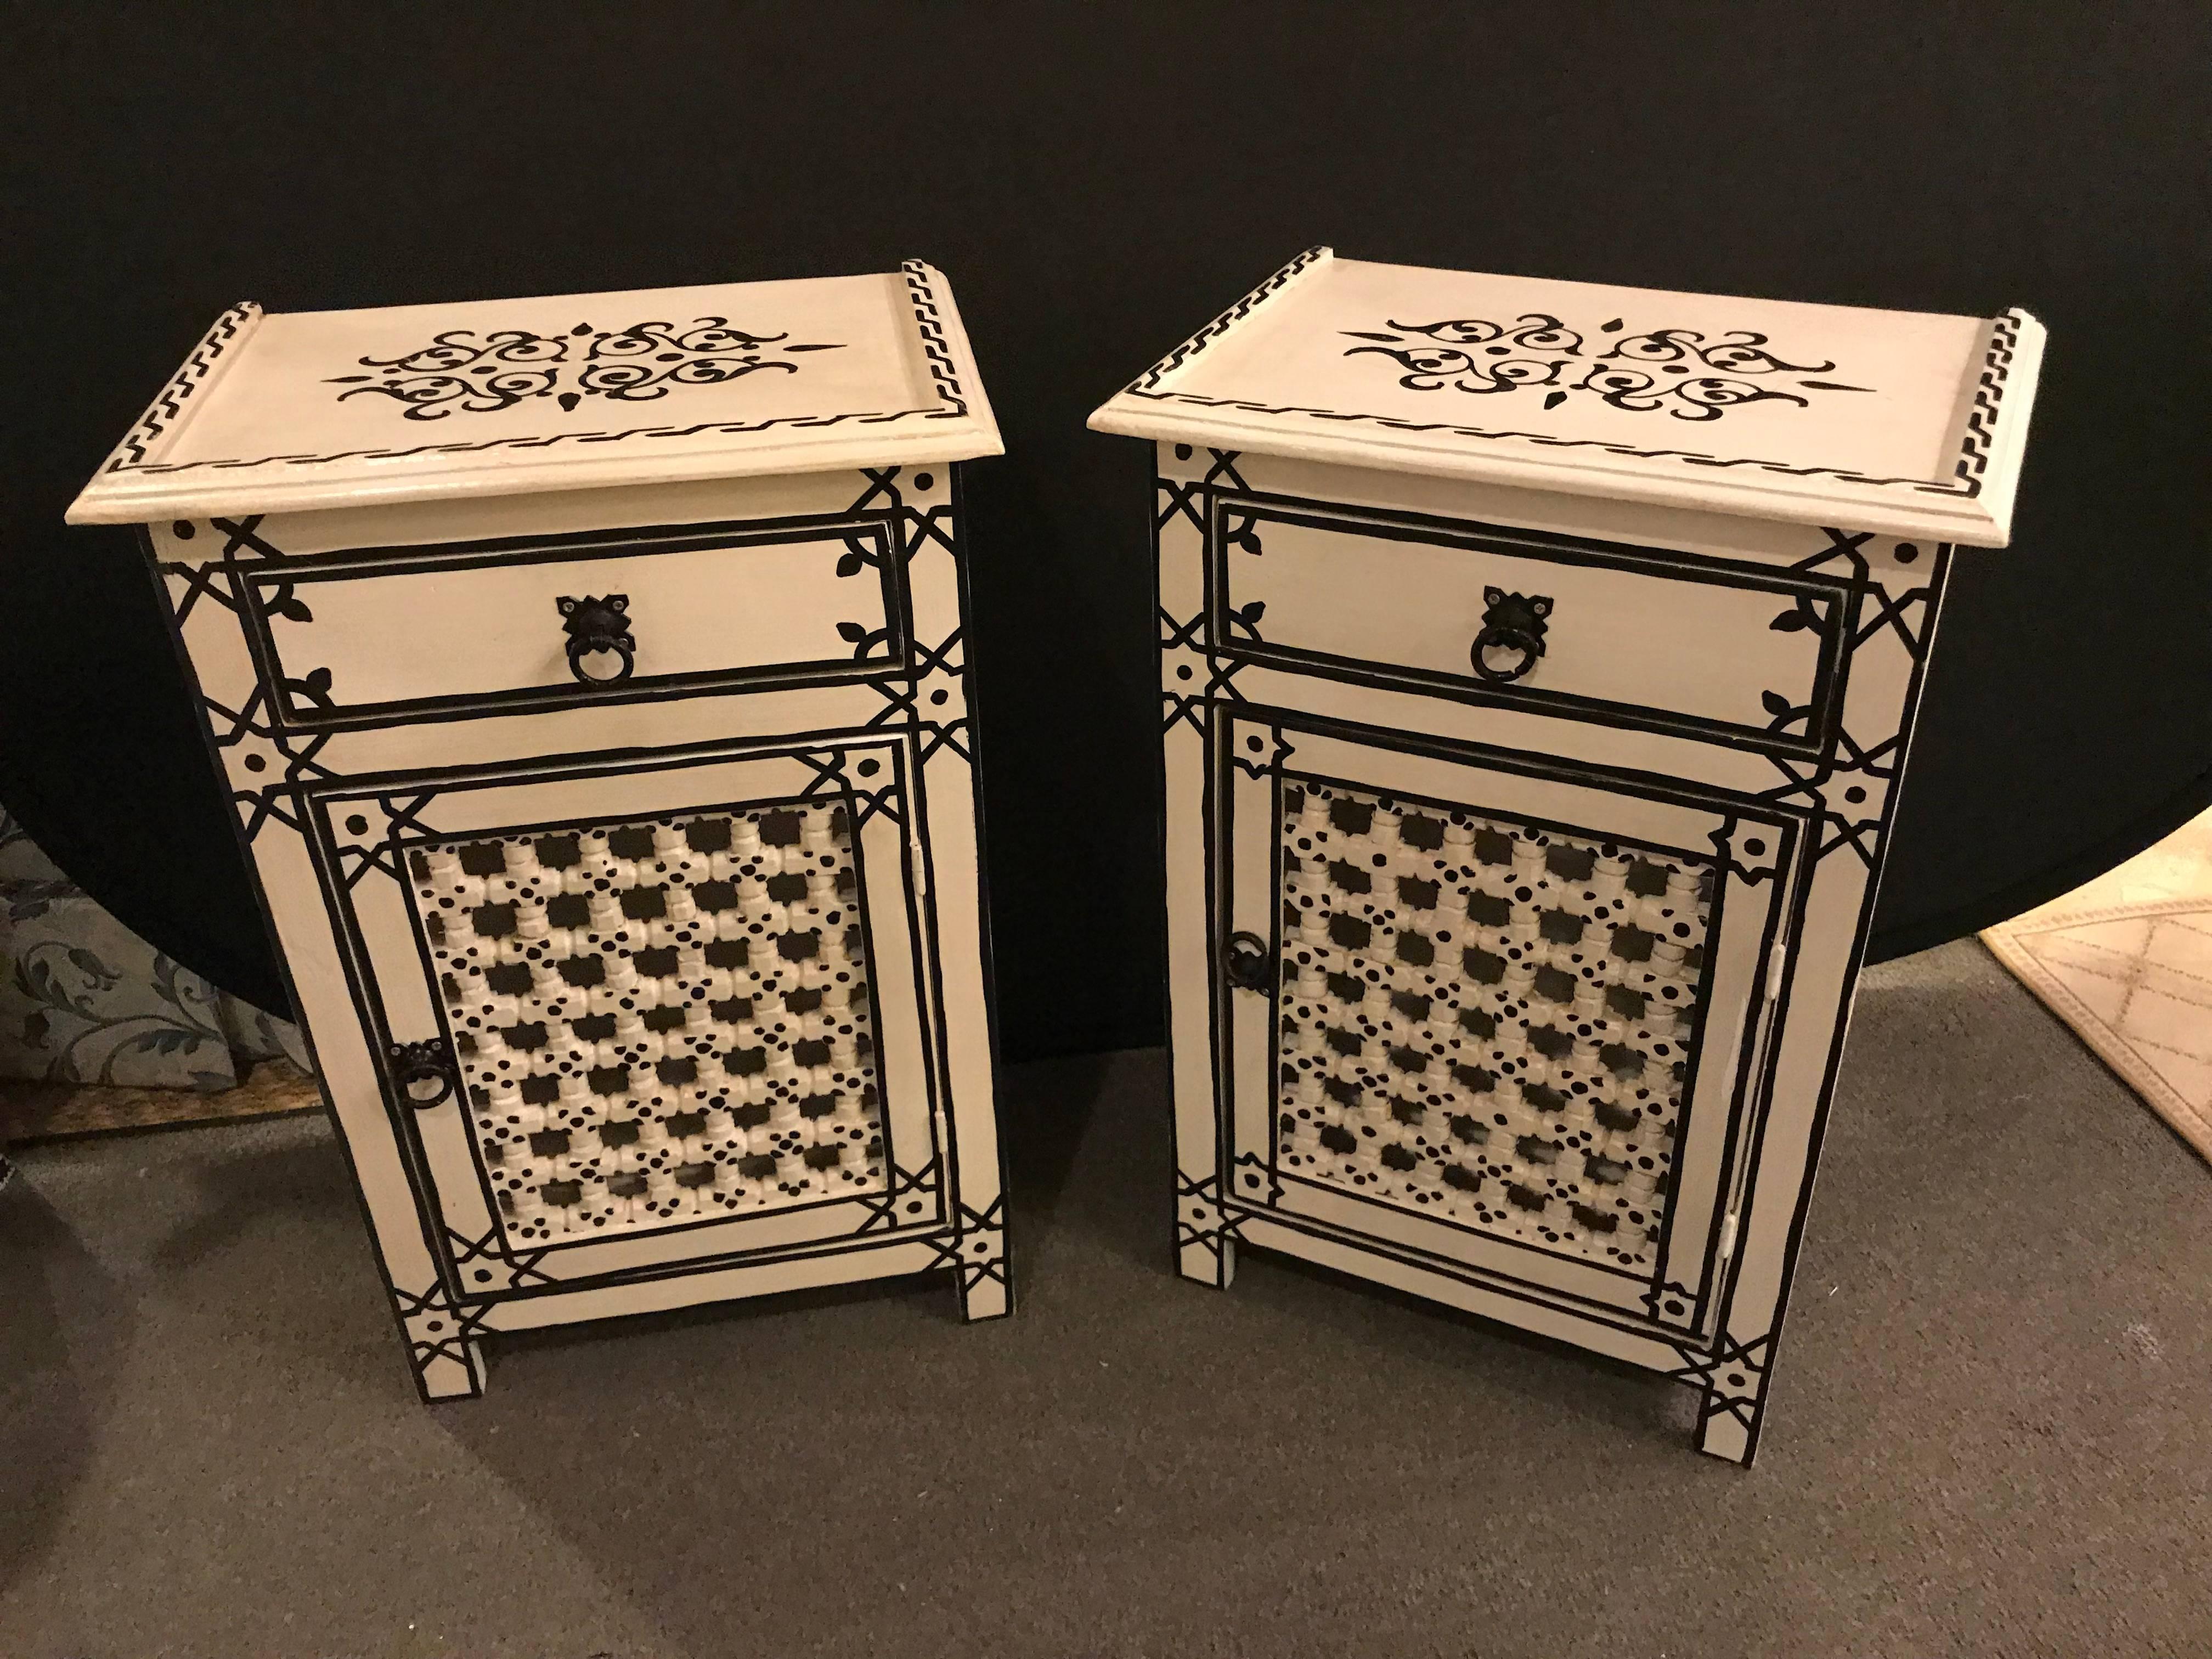 Pair of hand-painted Moroccan nightstands / end tables. Hand-painted by master artisans , this stunning pair of Moroccan nightstands features an interior cavity for storing personal items and impresses with its unique design and a welcoming black